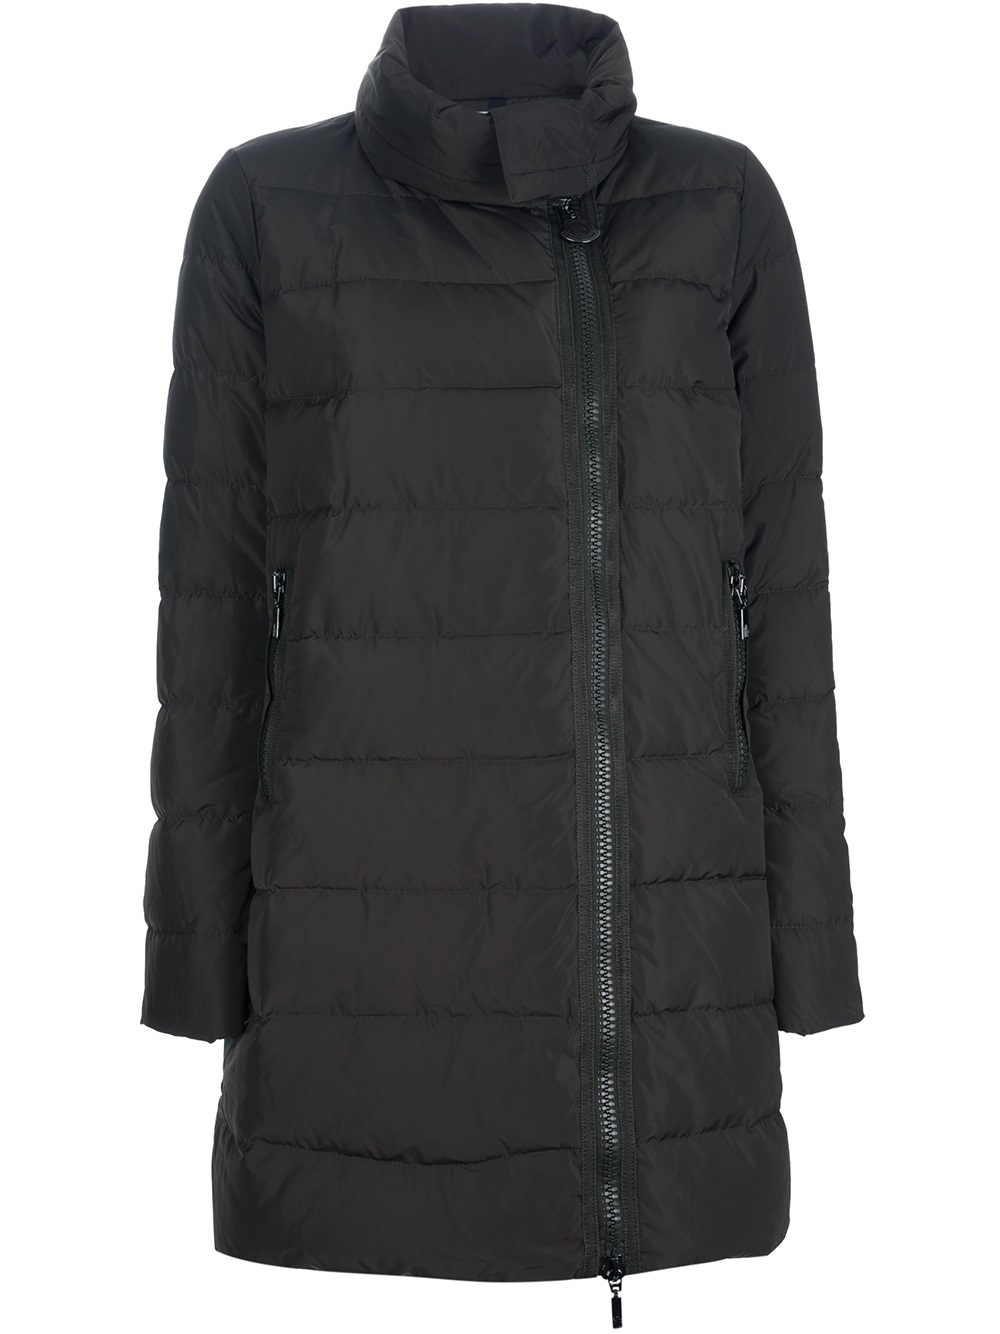 Moncler Gerboise Padded Jacket in Grey (Green) - Lyst